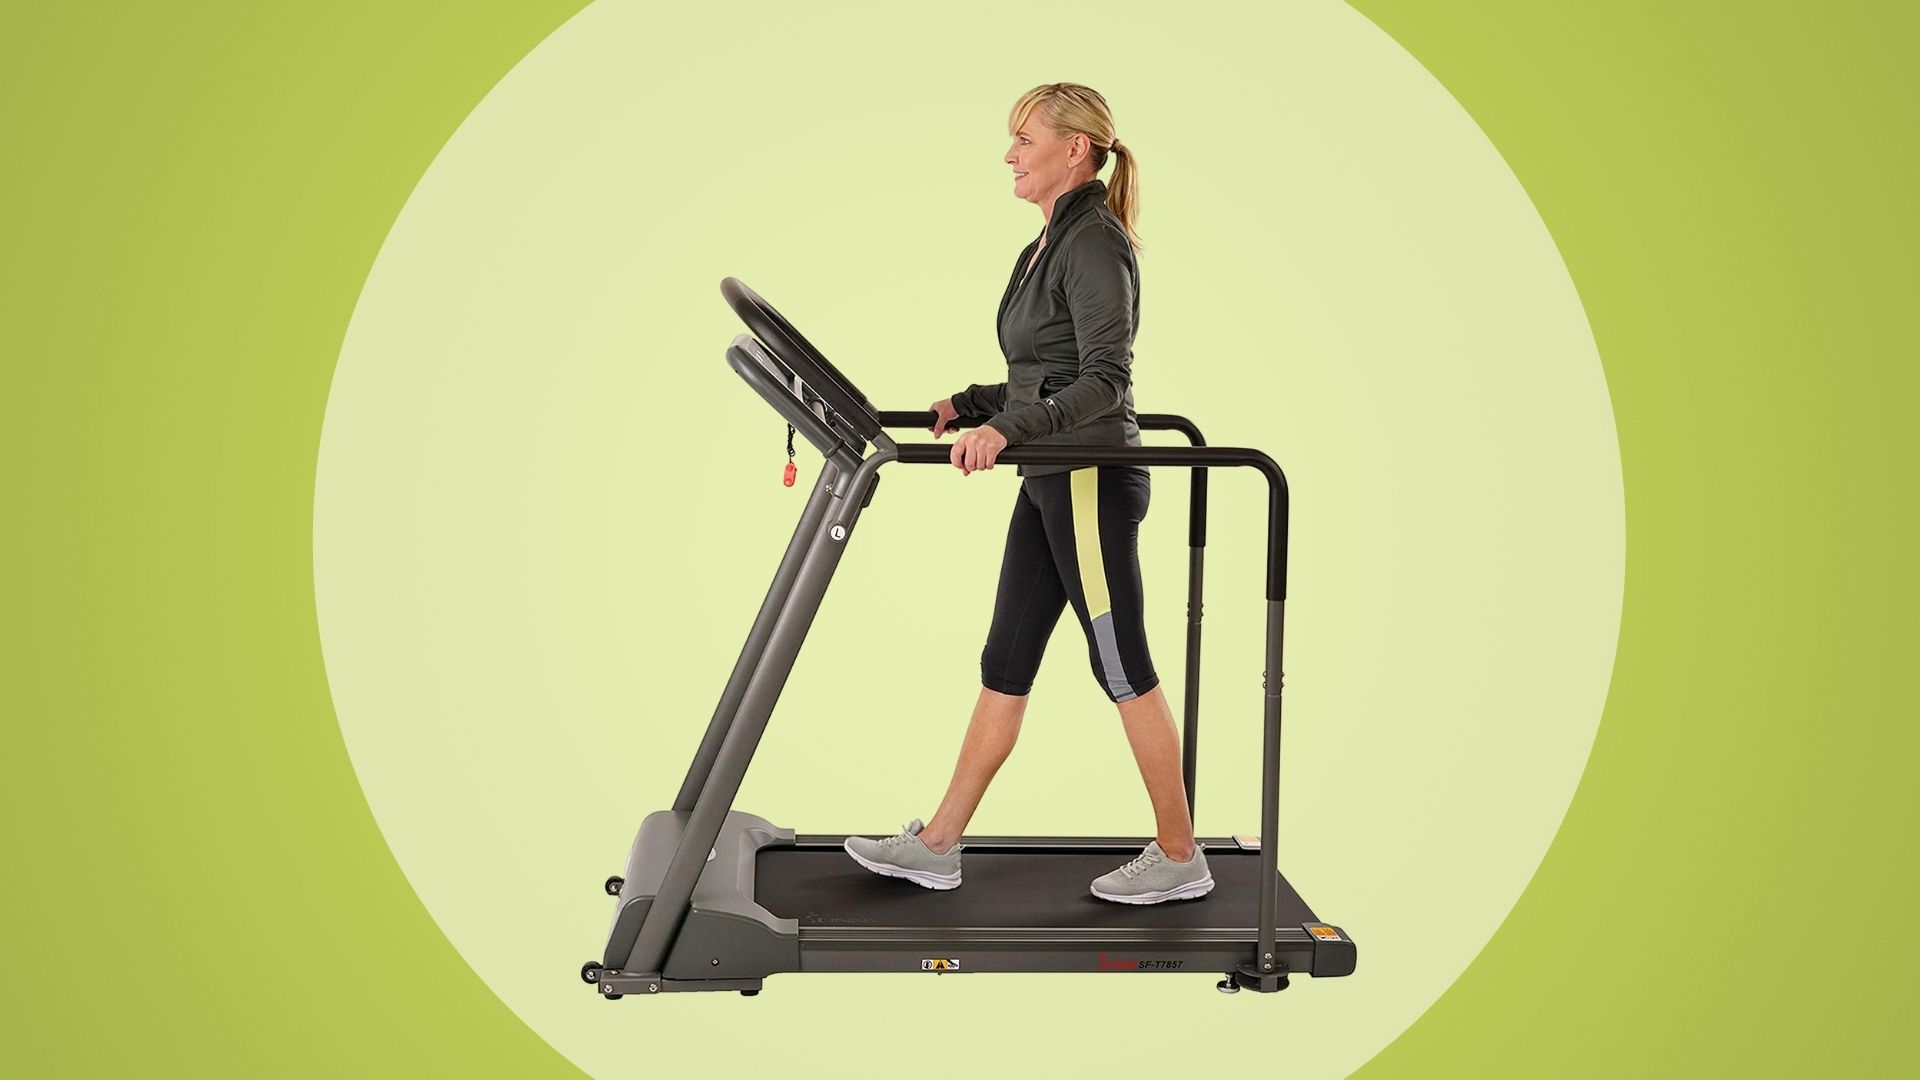 Indoor Foldable Treadmill Fitness Home Gym Exercise non electric Running Machine 